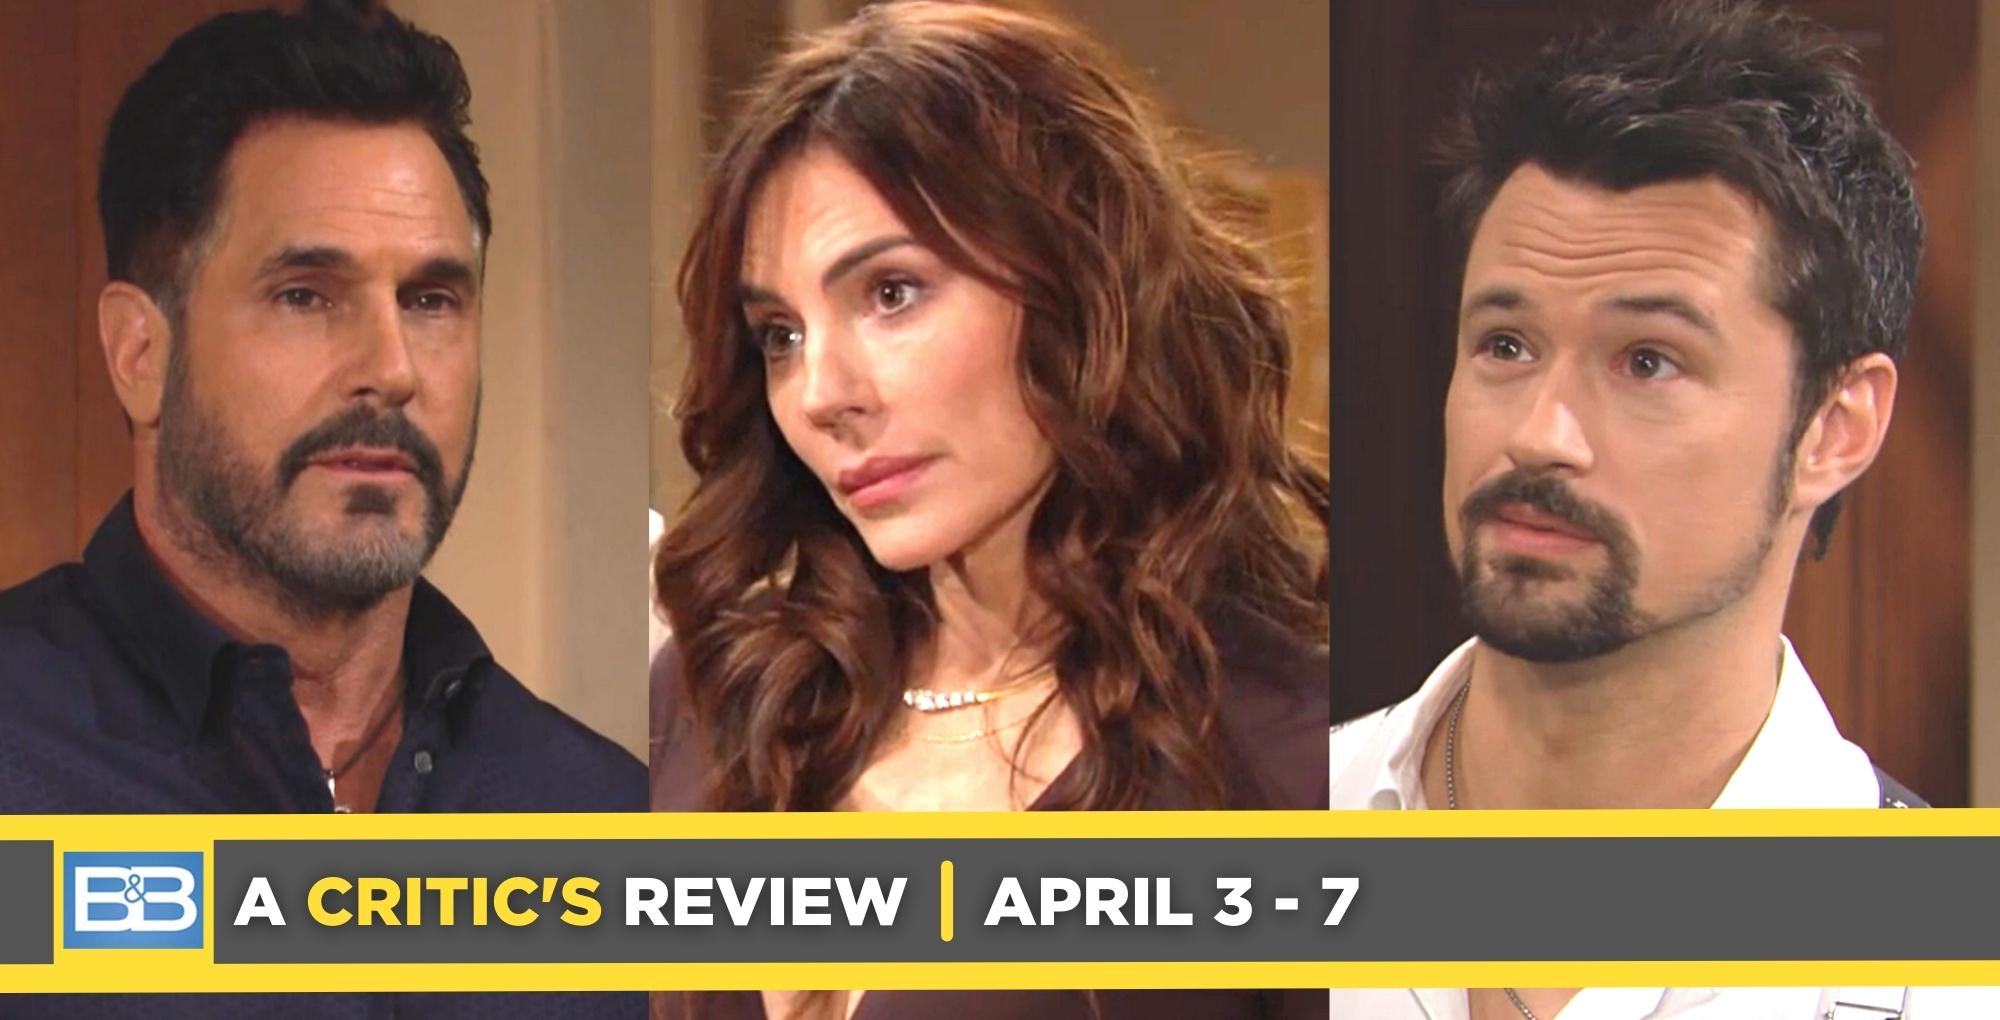 the bold and the beautiful critic's review for april 3 – april 7, 2023, three images bill, taylor, and thomas